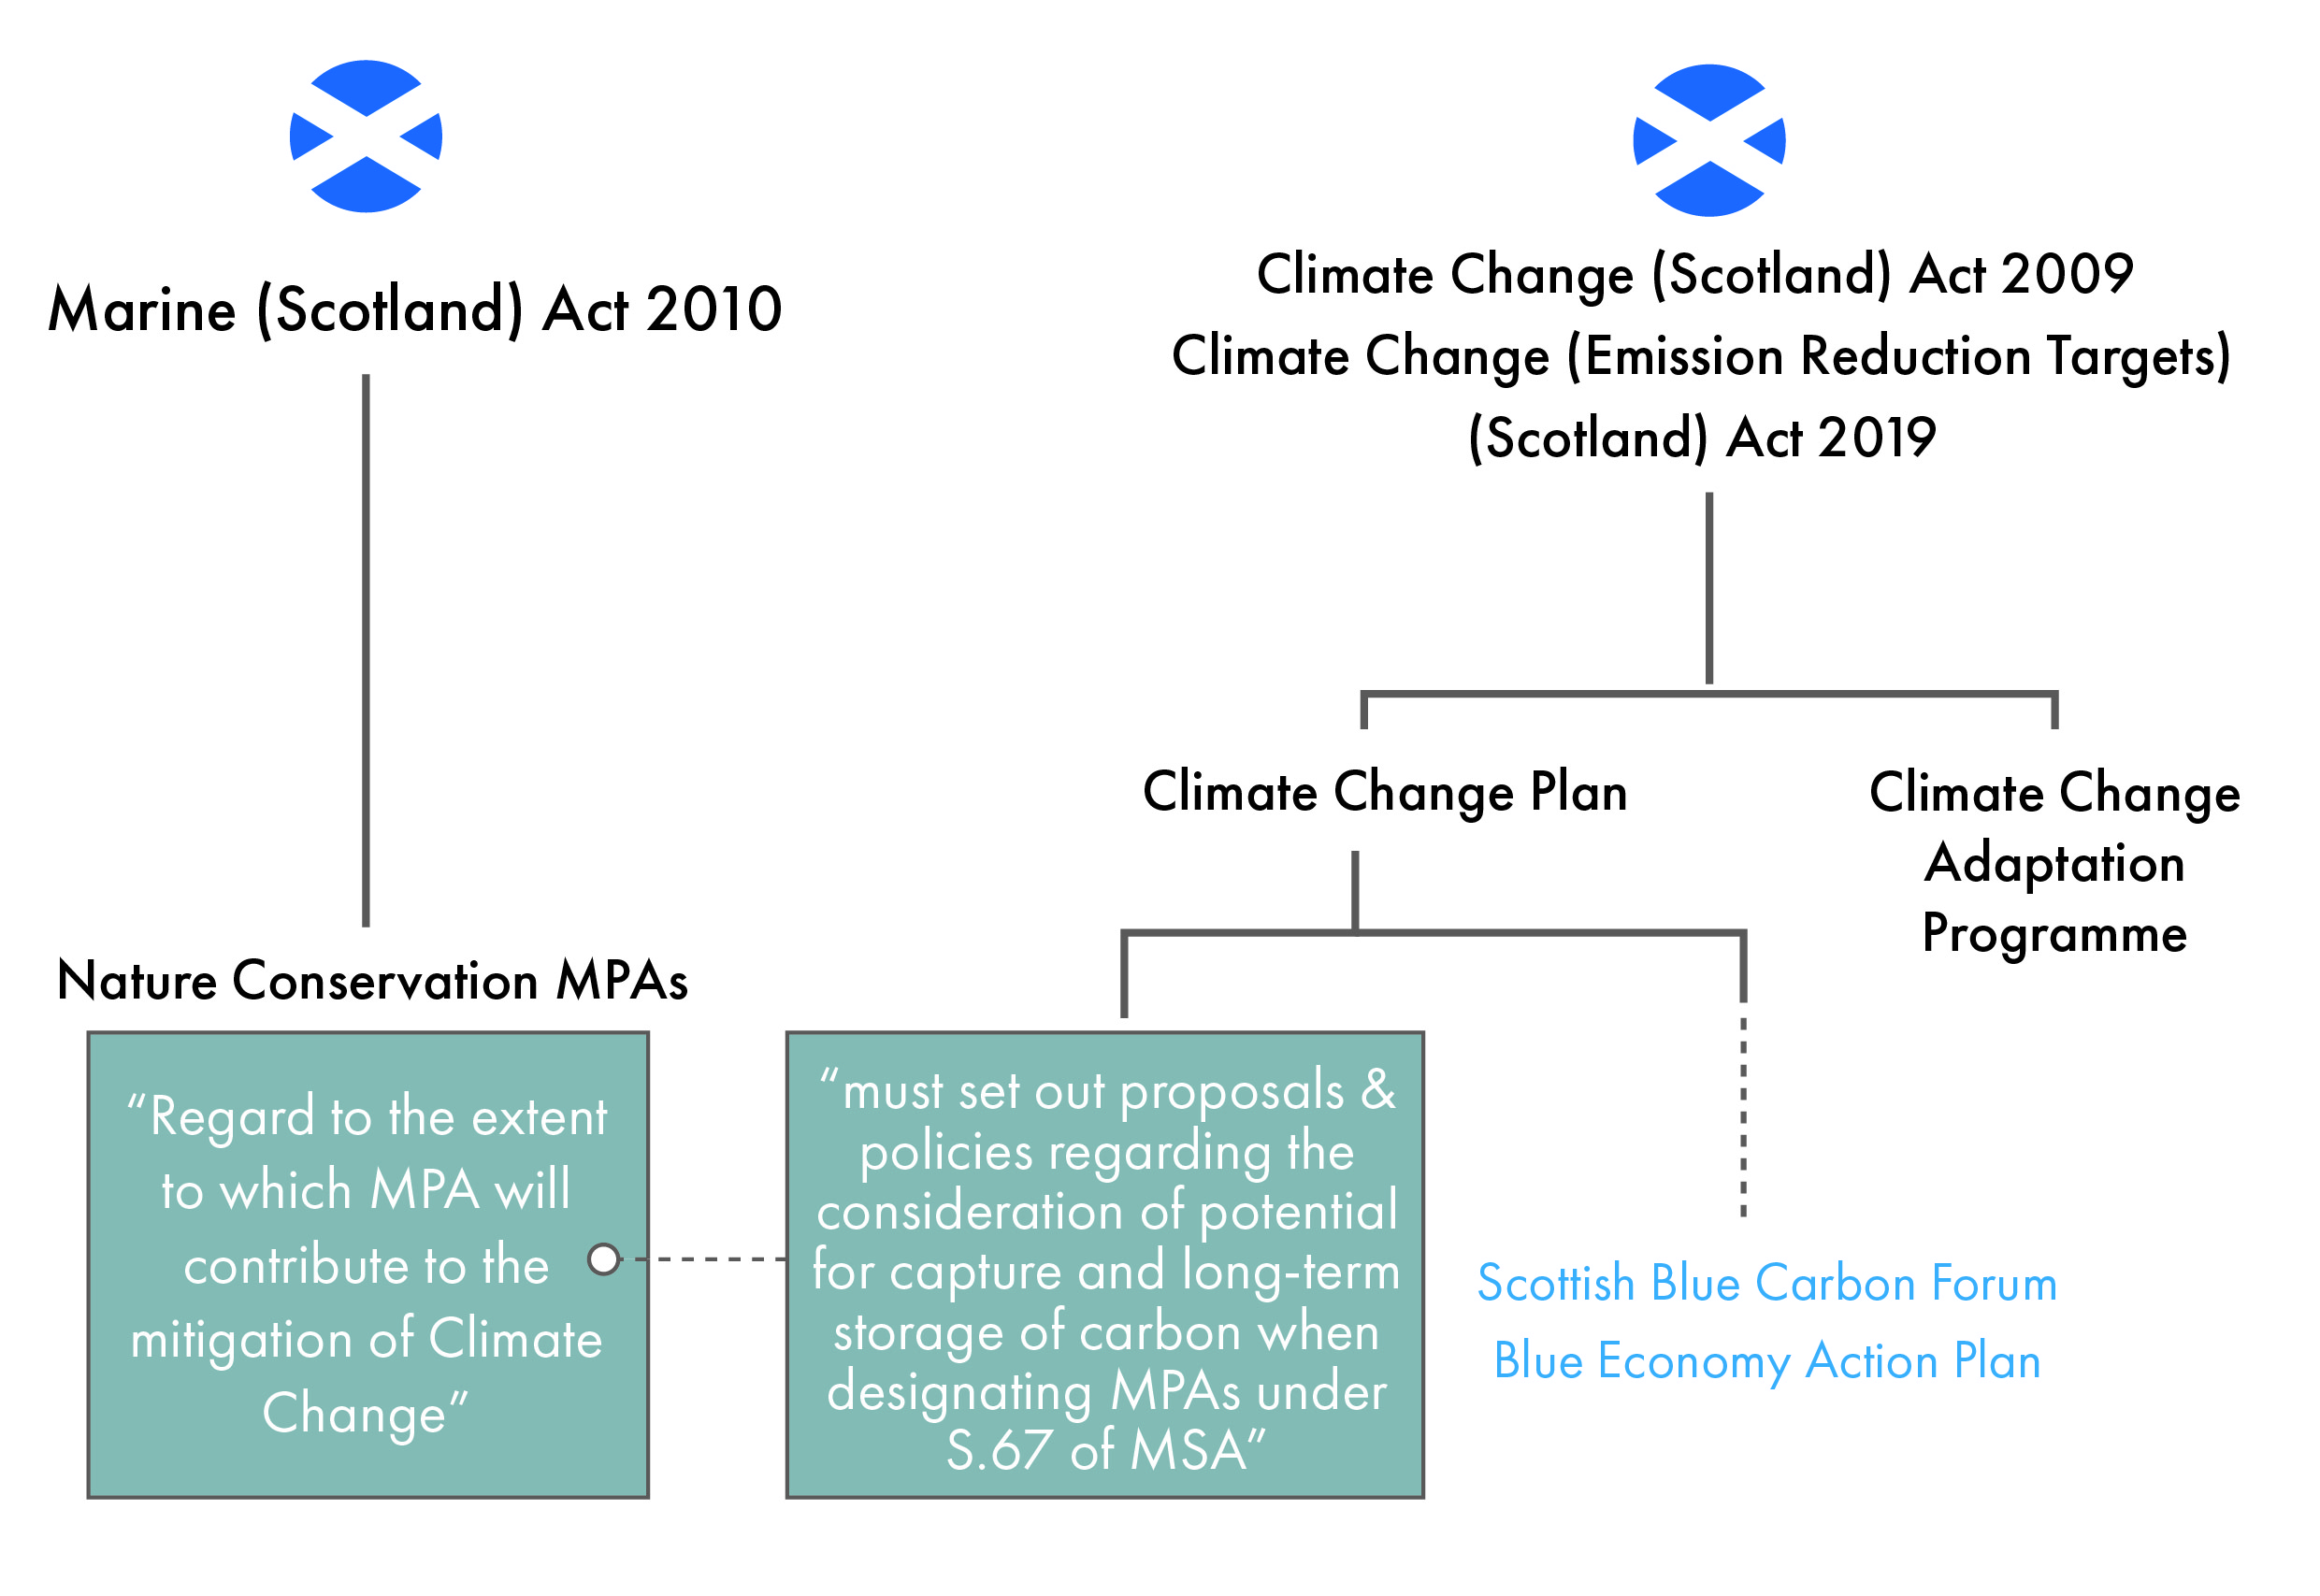 Diagram showing the plans and programmes required by the Climate Change Acts, showing the regard to which the CCP must consider carbon storage when designating MPAs under the Marine Scotland Act.